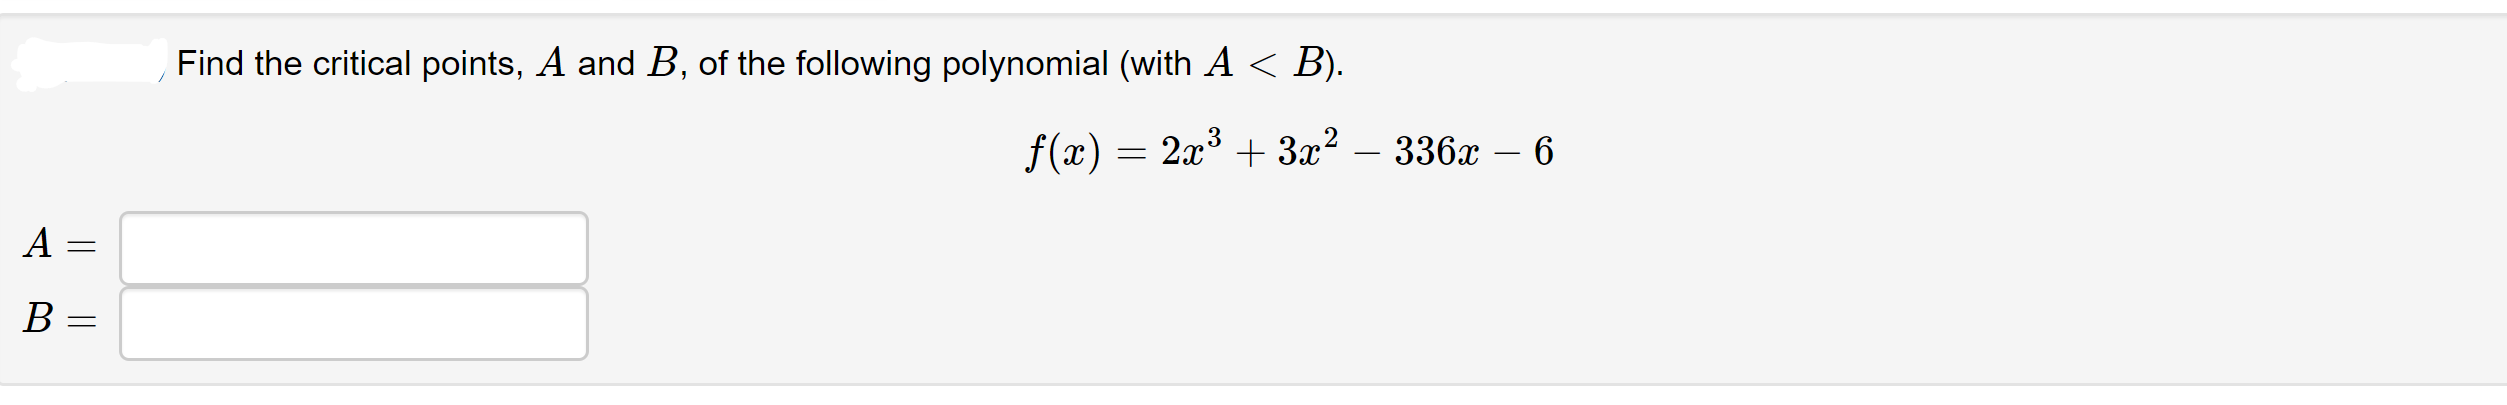 Find the critical points, A and B, of the following polynomial (with A < B).
f(x) = 2x³ + 3x²
336х — 6
A =
B =
||||
